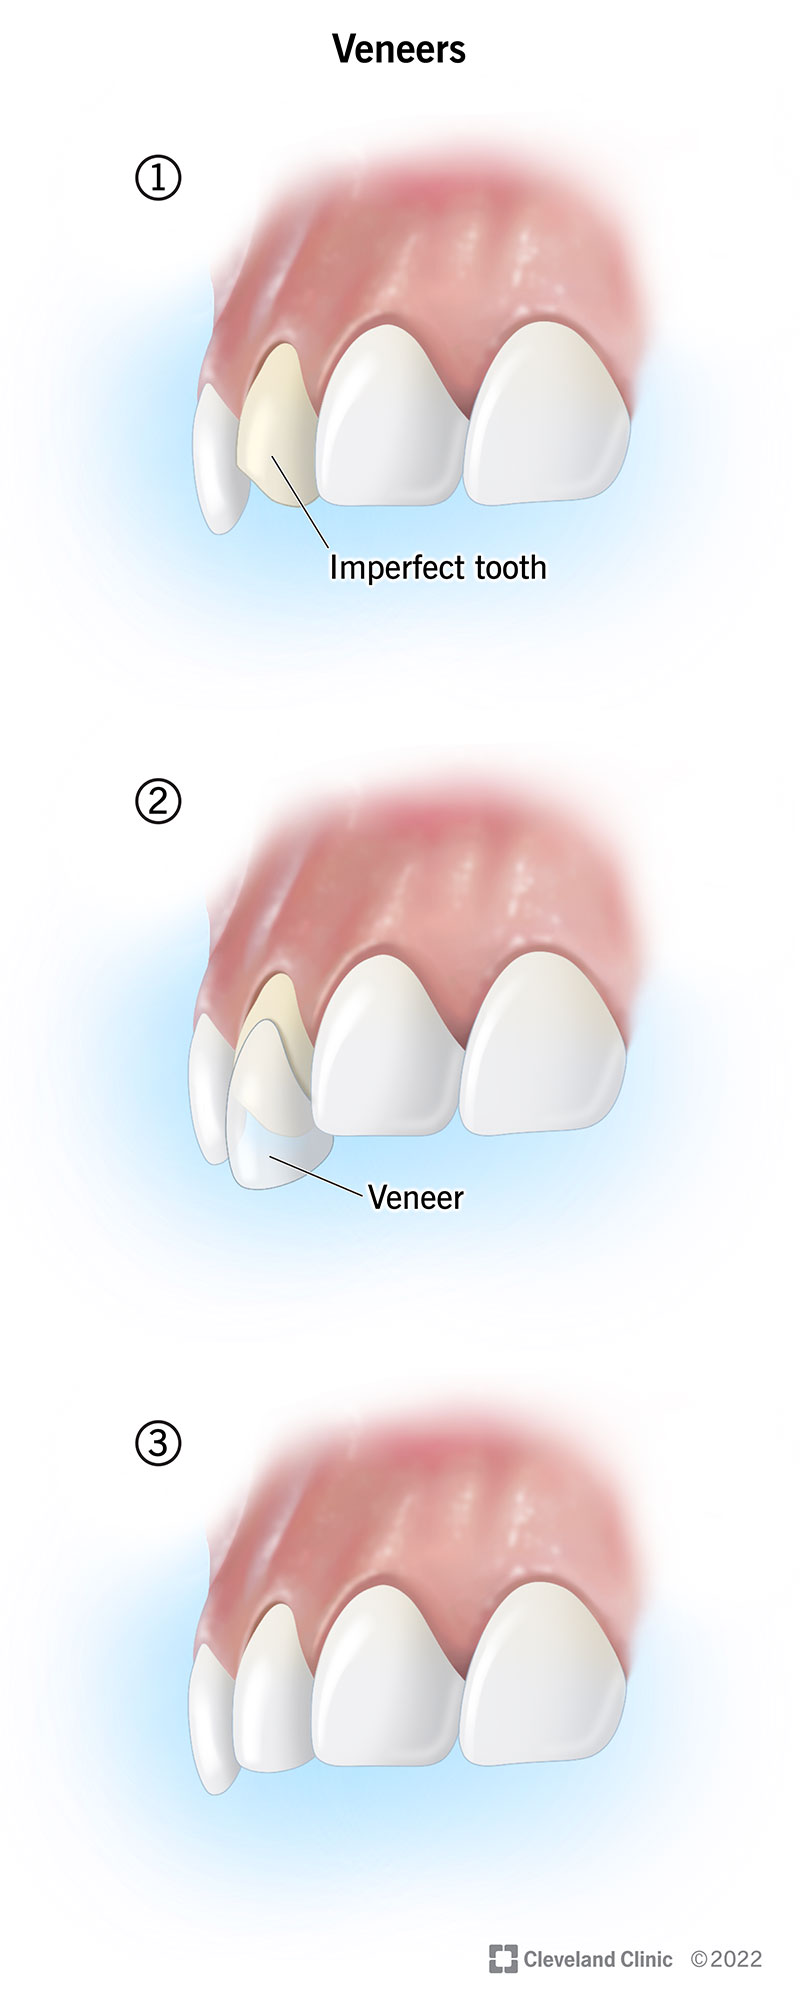 A veneer can conceal a chipped tooth and make your smile more uniform.